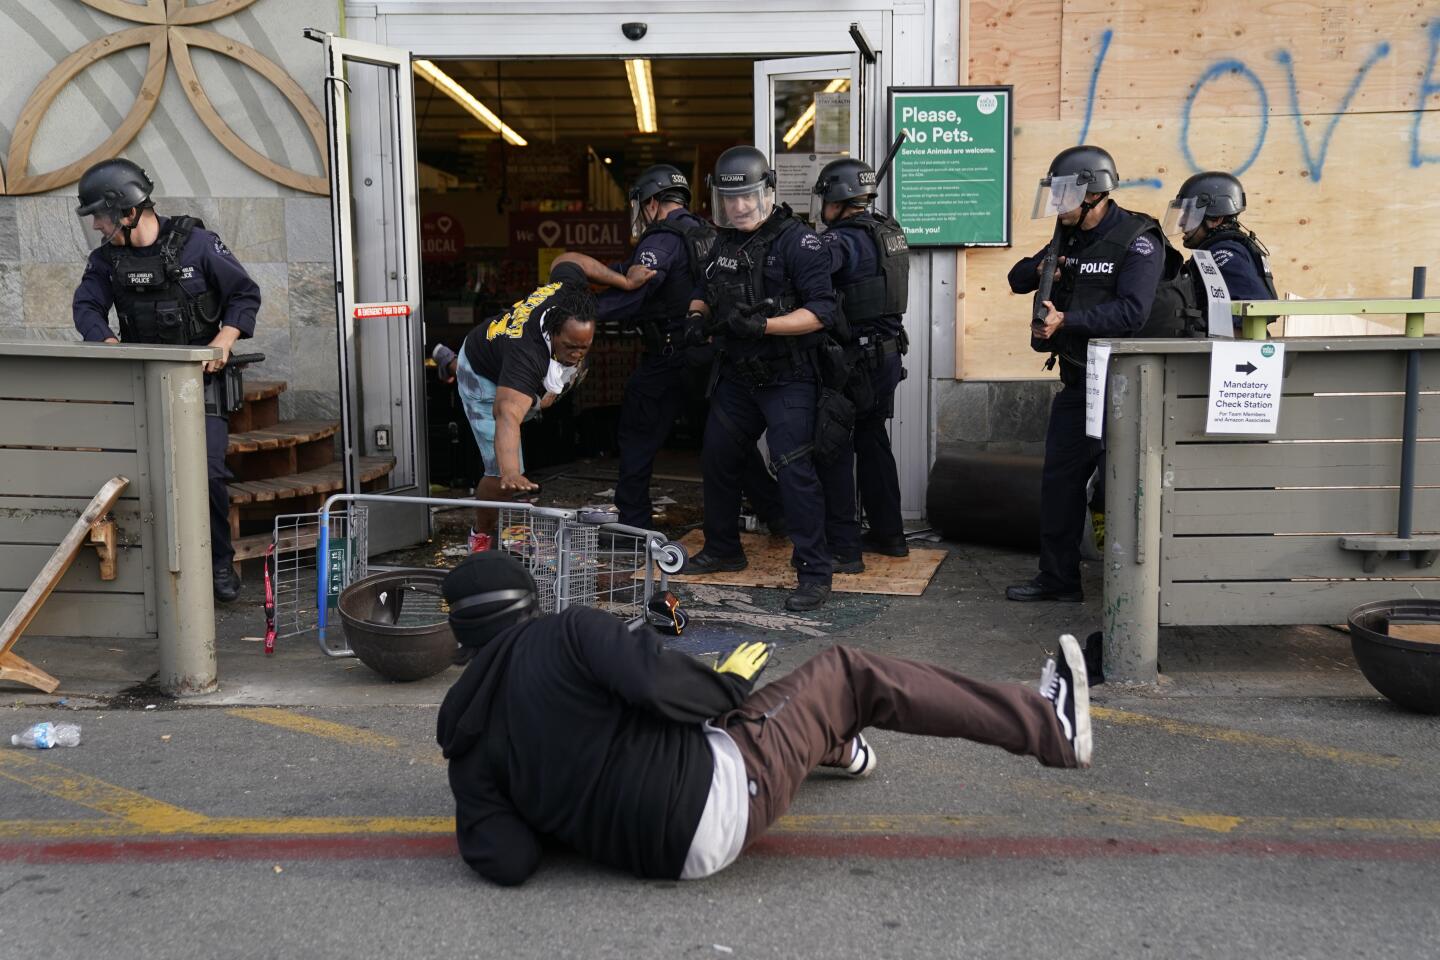 Police arrest looters at Whole Foods Market in the Fairfax District on Saturday in Los Angeles